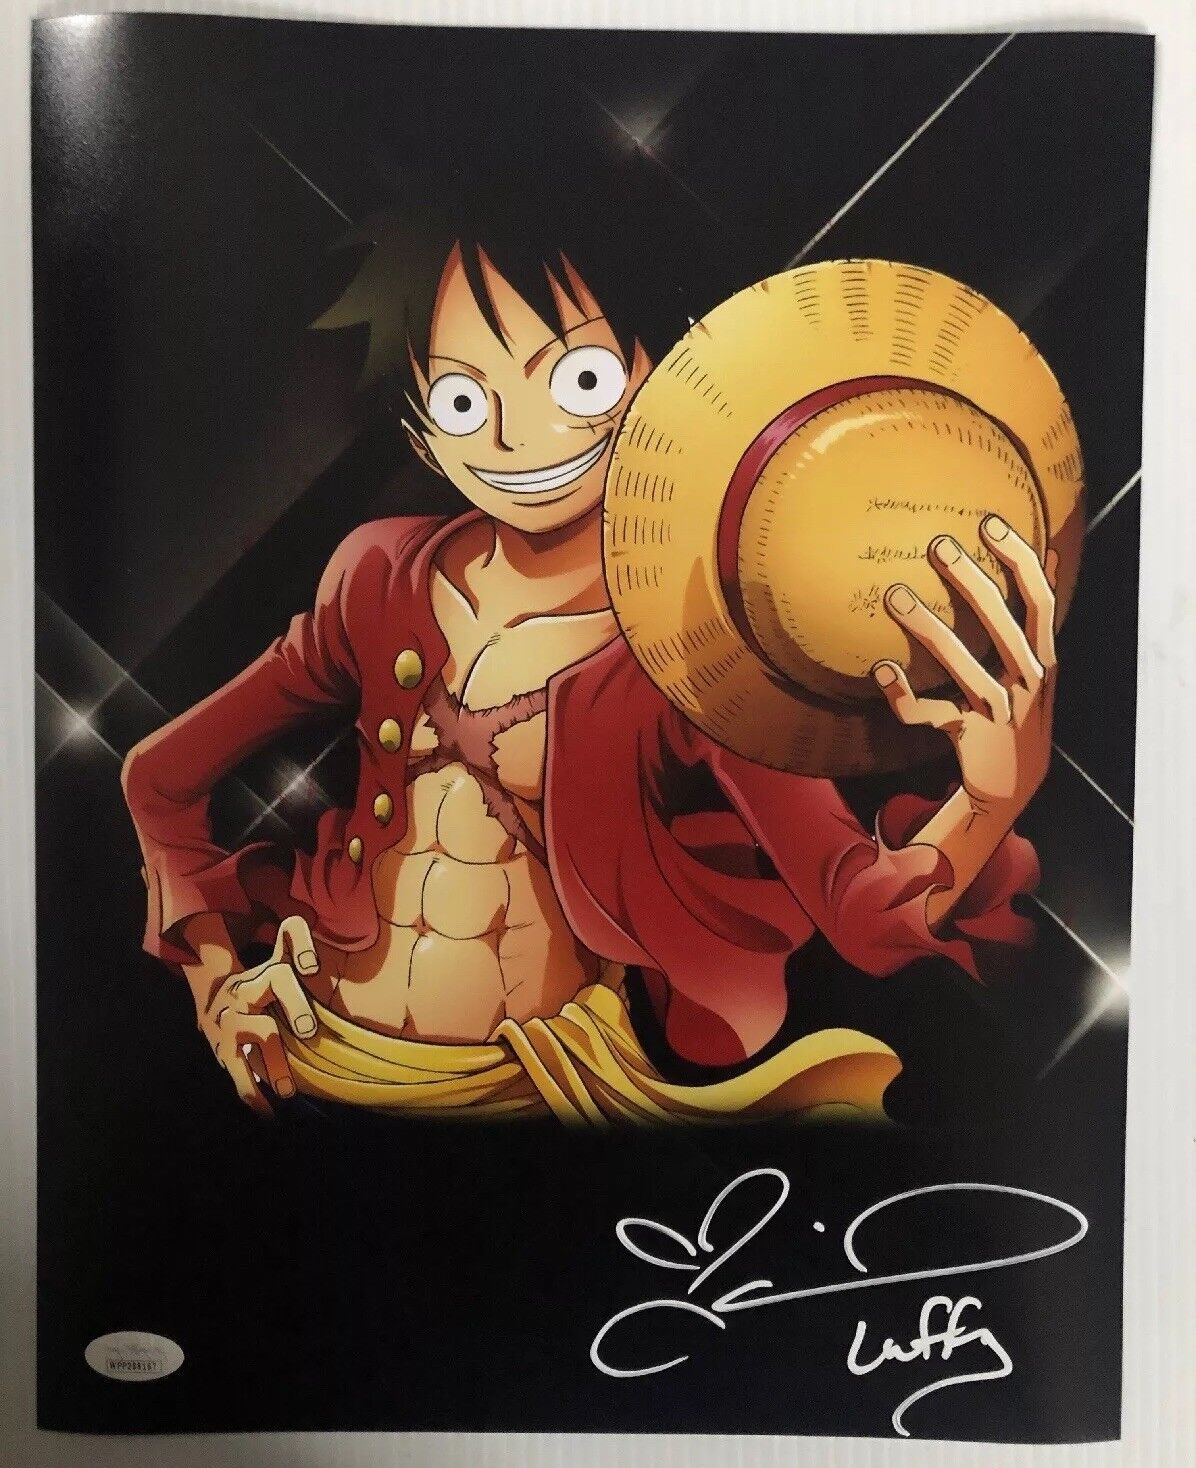 Colleen Clinkenbeard Signed Autographed 11x14 Photo Poster painting Luffy One Piece JSA 1